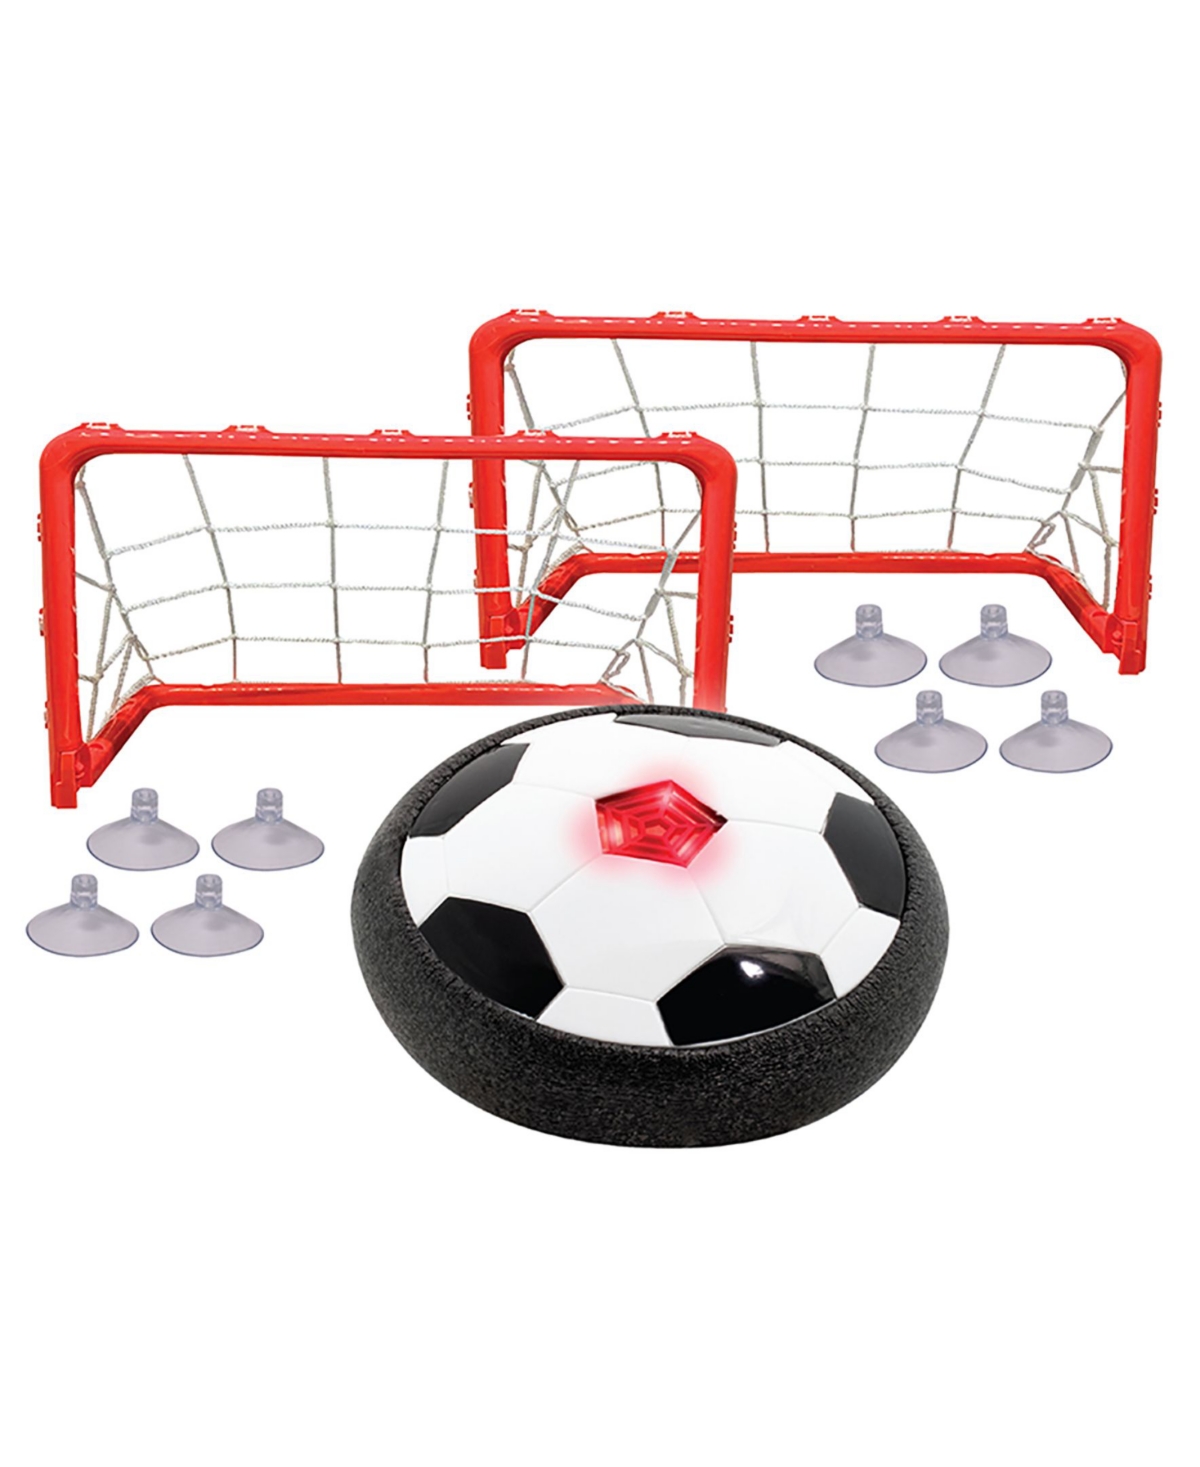 Maccabi Art Kids' Air Soccer Hover Ball Disk With 2 Goal Post Nets Game In Multi